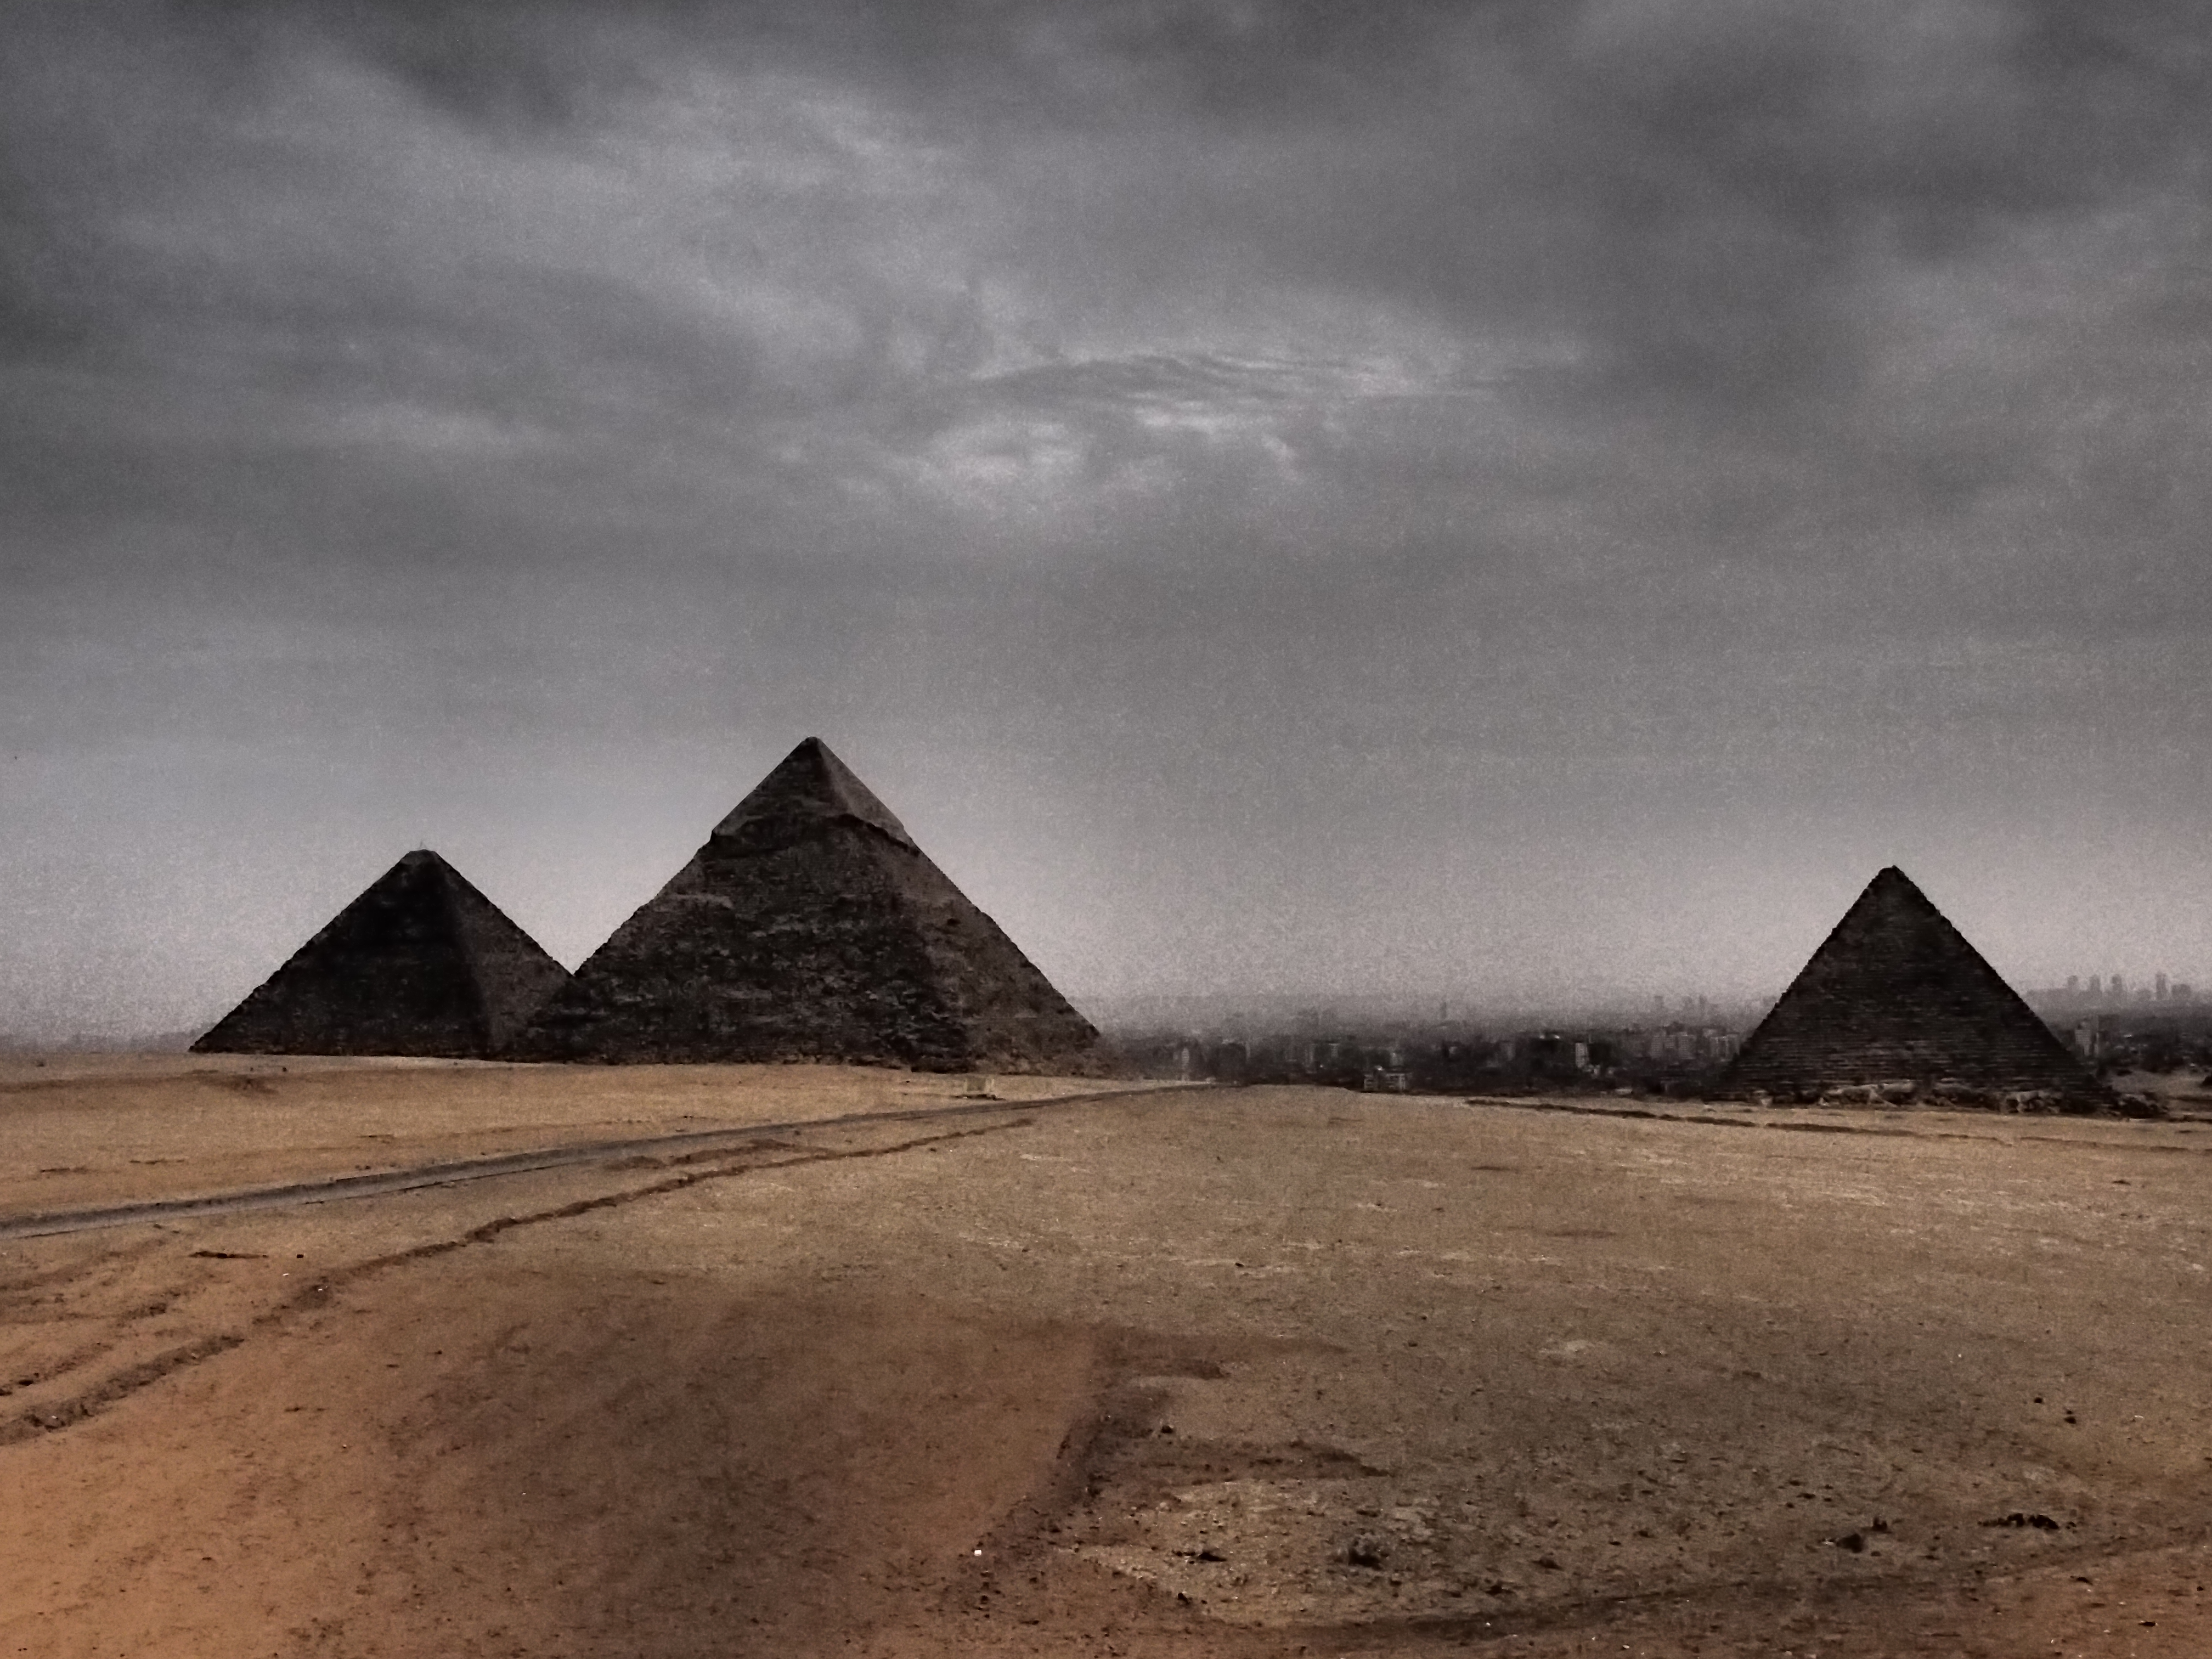 A visit to the pyramids | Another Travel Blog